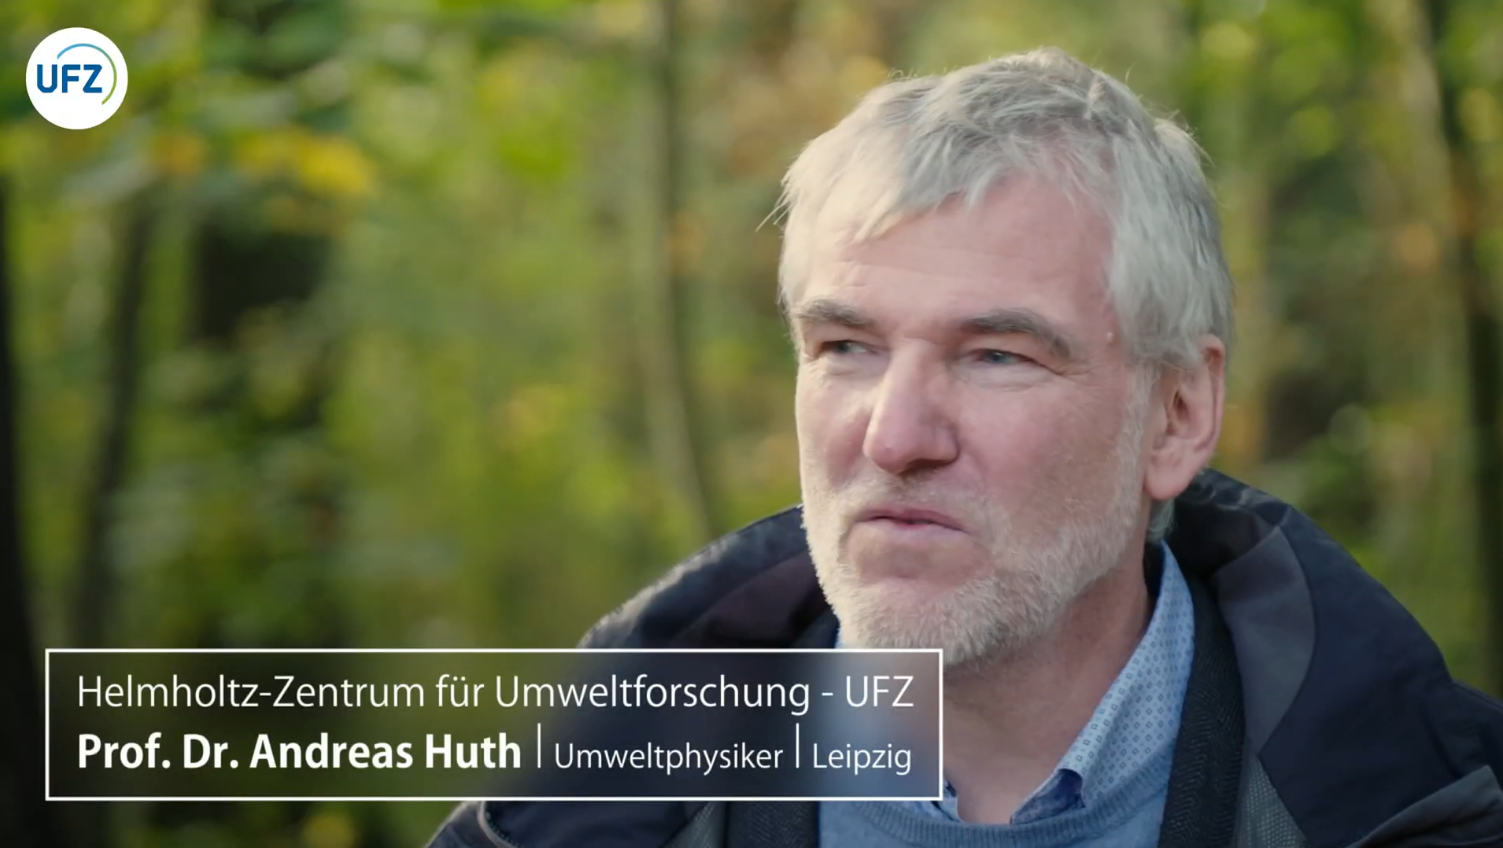 Prof. Dr. Andreas Huth. Quelle: UFZ / youtube